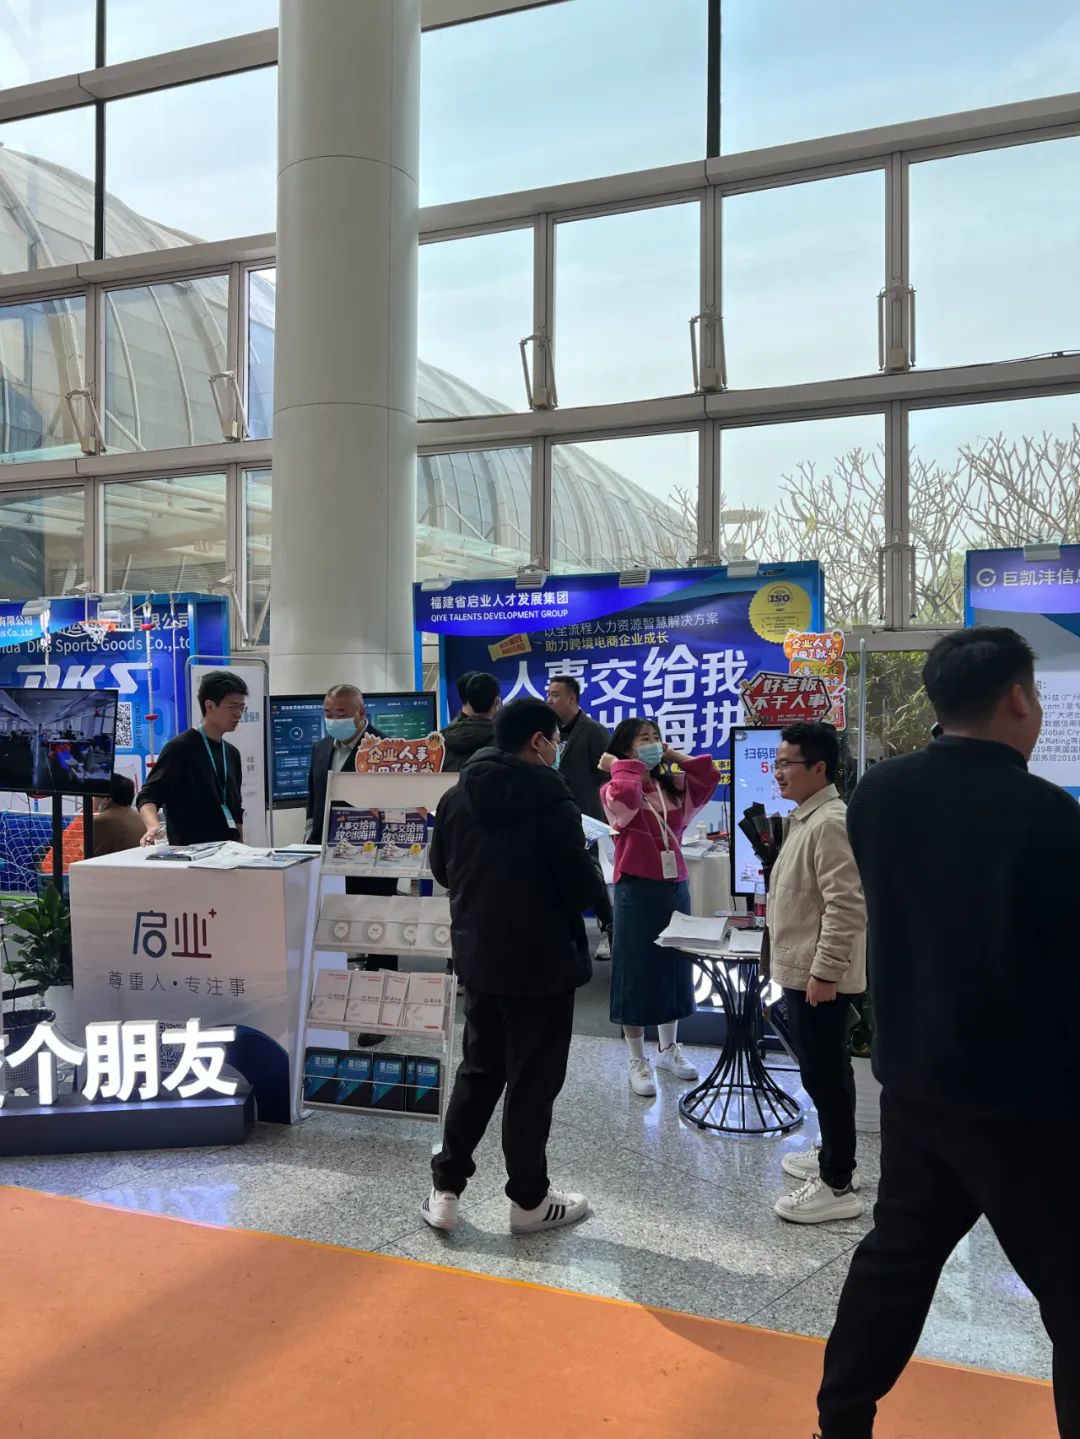 Help the development of cross-border e-commerce!'Xingqitu Human Resources Management' participated in the 2023 China Cross-Trade Fair for the first time, and the booth was popular